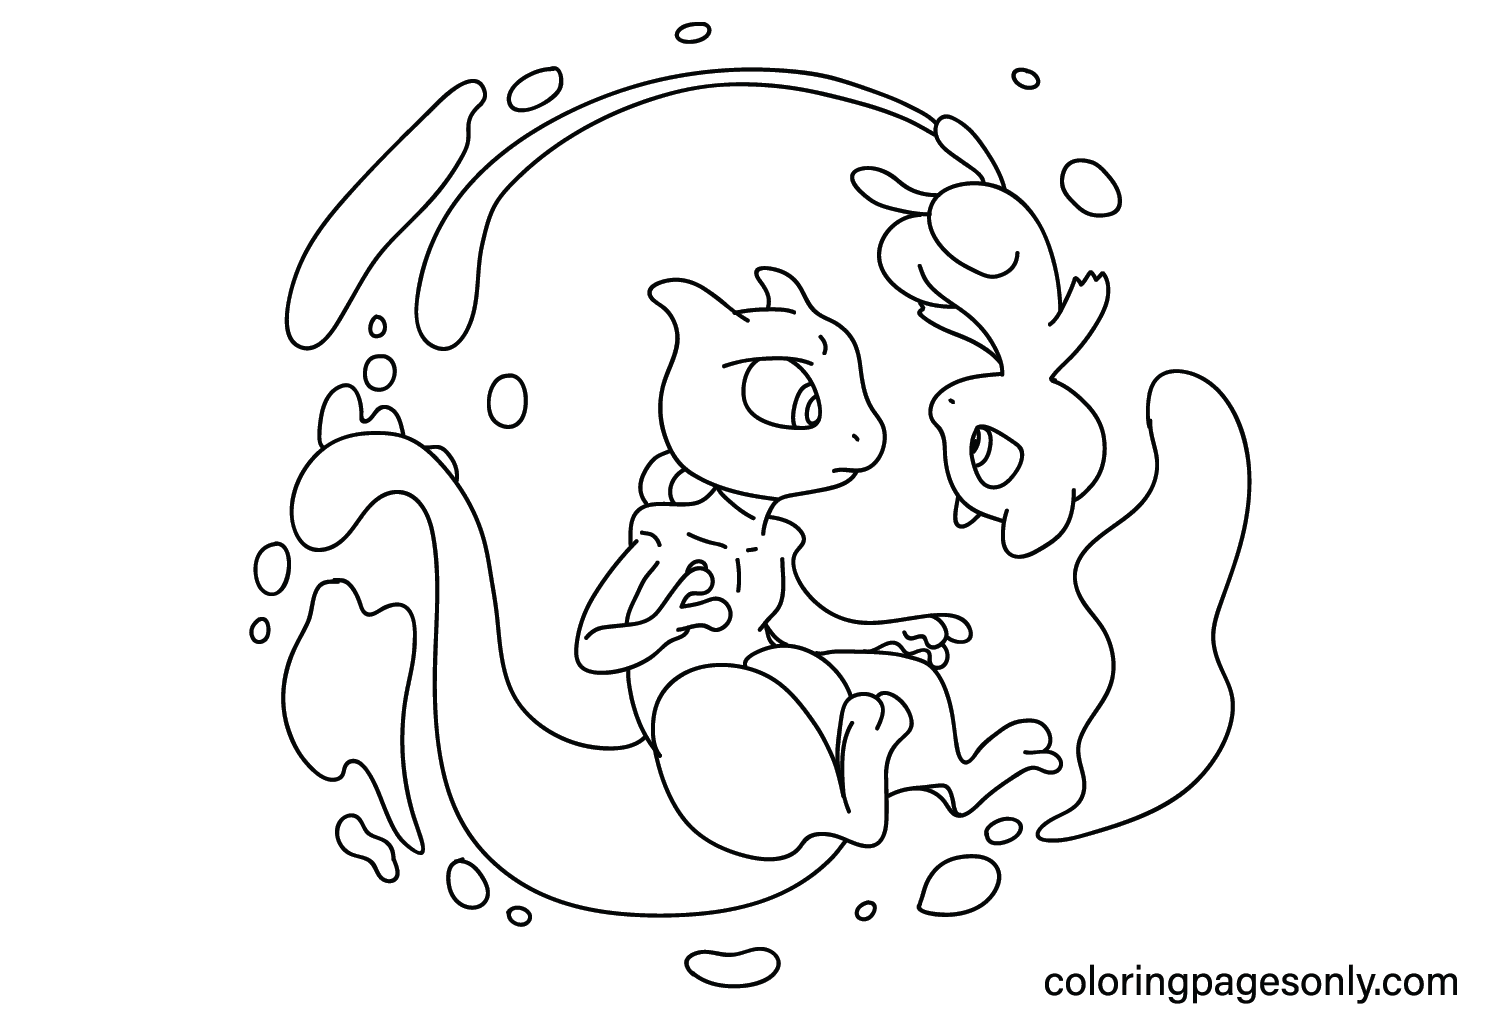 Mewtwo, Mew Coloring Pages to Download from Mew